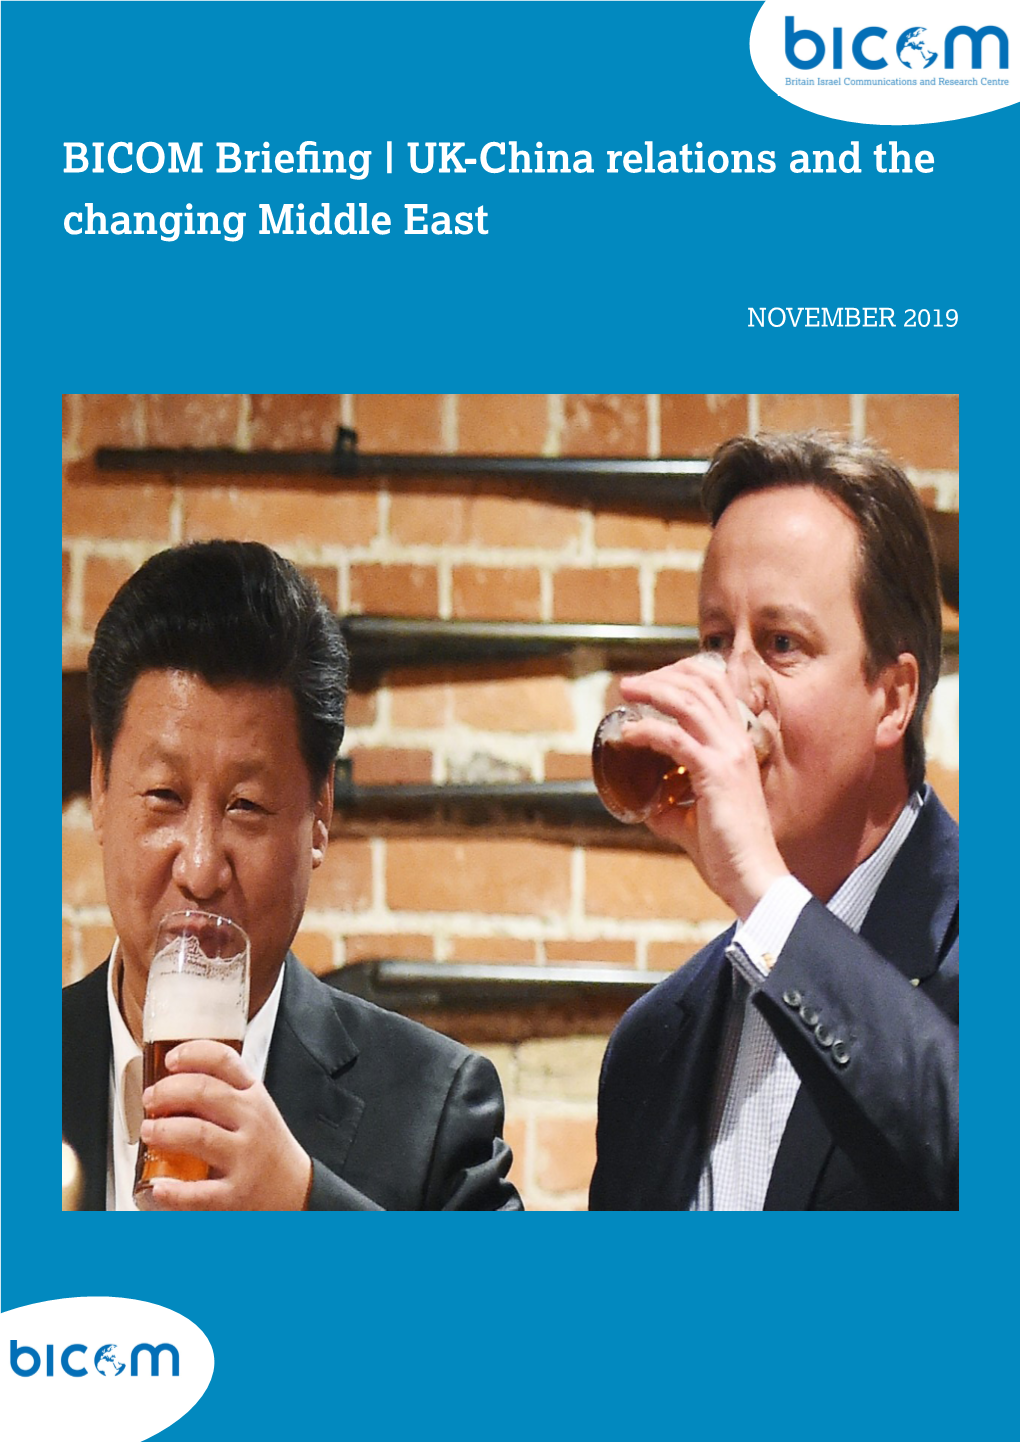 BICOM Briefing | UK-China Relations and the Changing Middle East